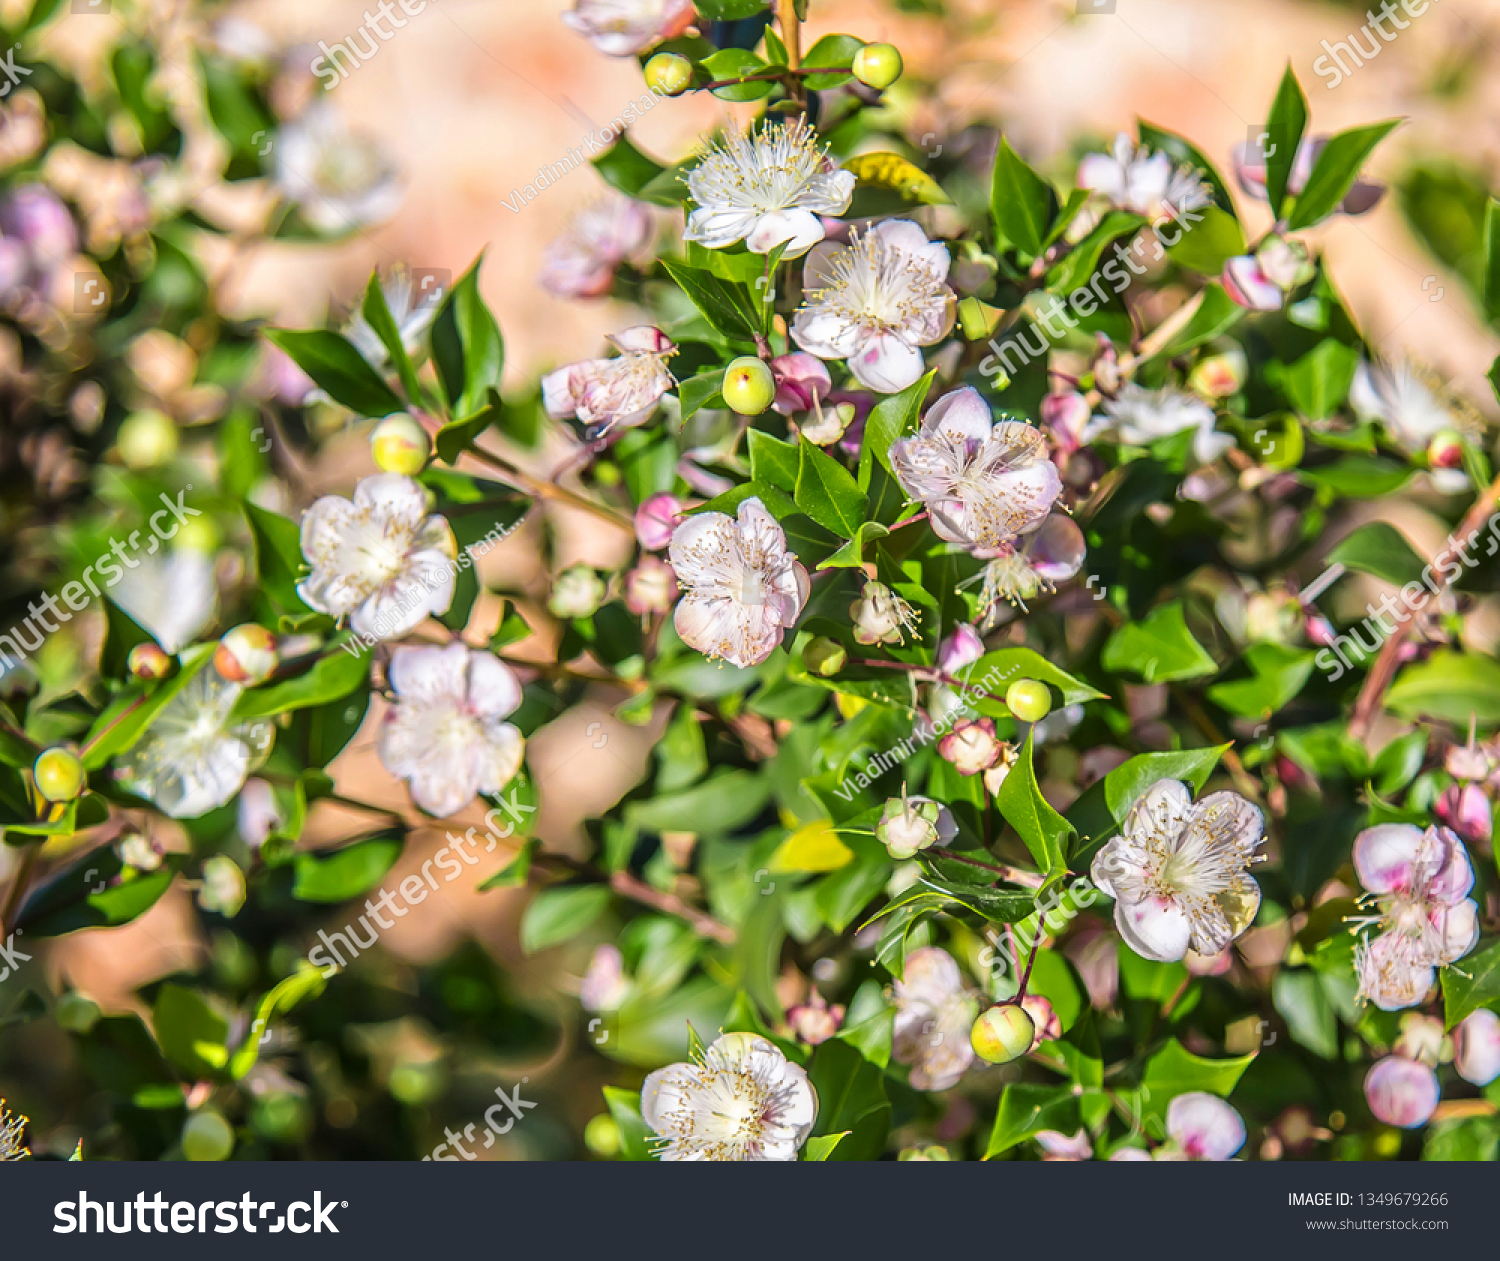 White pink flowers of a plant ligustrum on a background of stones in nature #1349679266